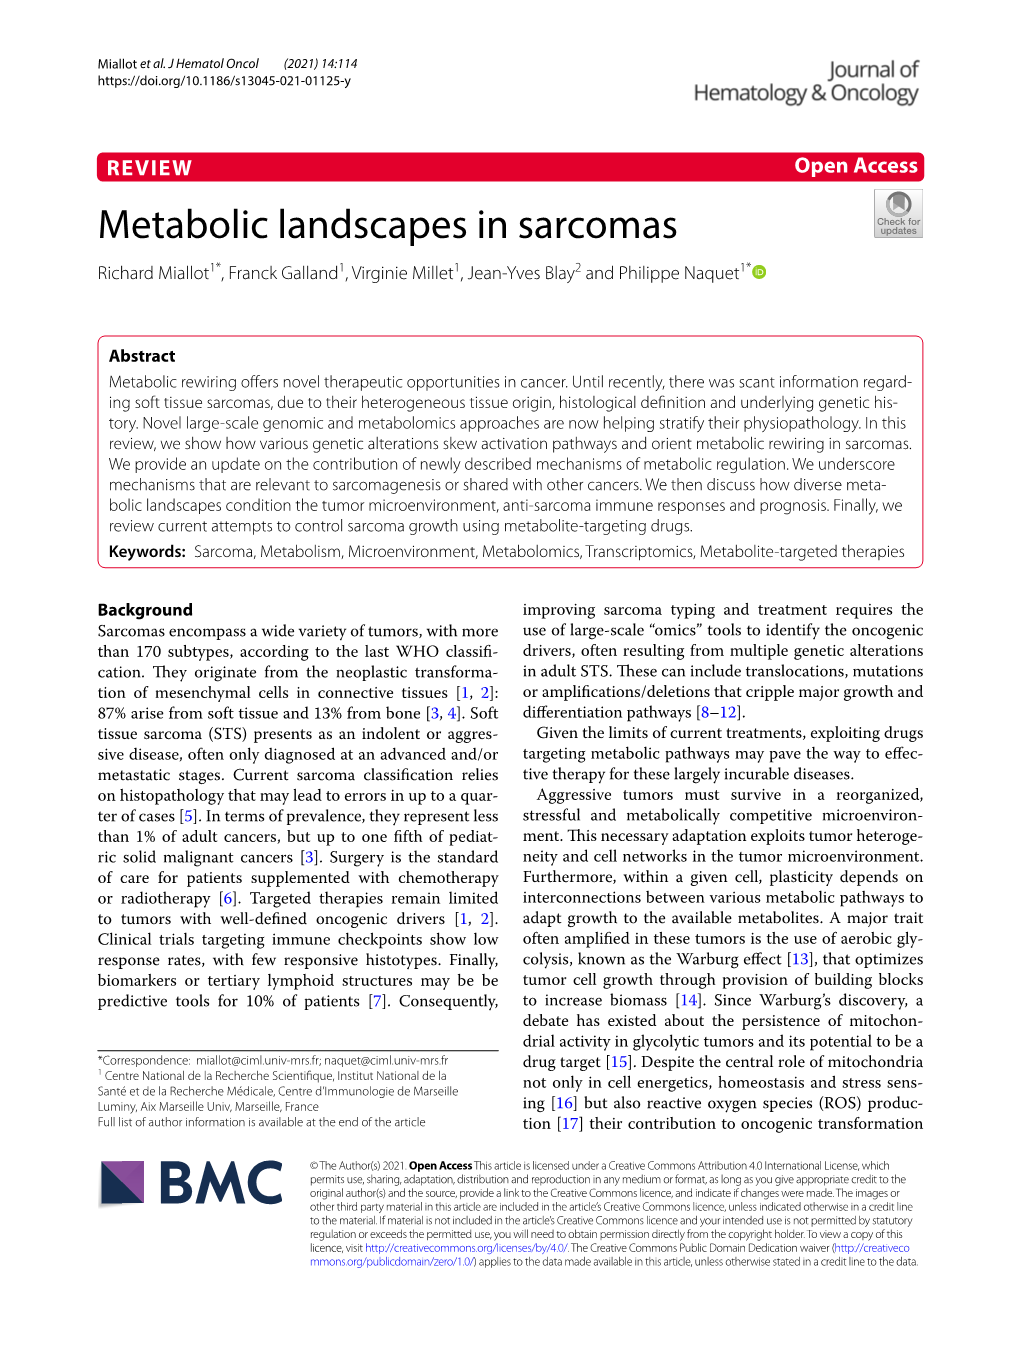 Metabolic Landscapes in Sarcomas Richard Miallot1*, Franck Galland1, Virginie Millet1, Jean‑Yves Blay2 and Philippe Naquet1*